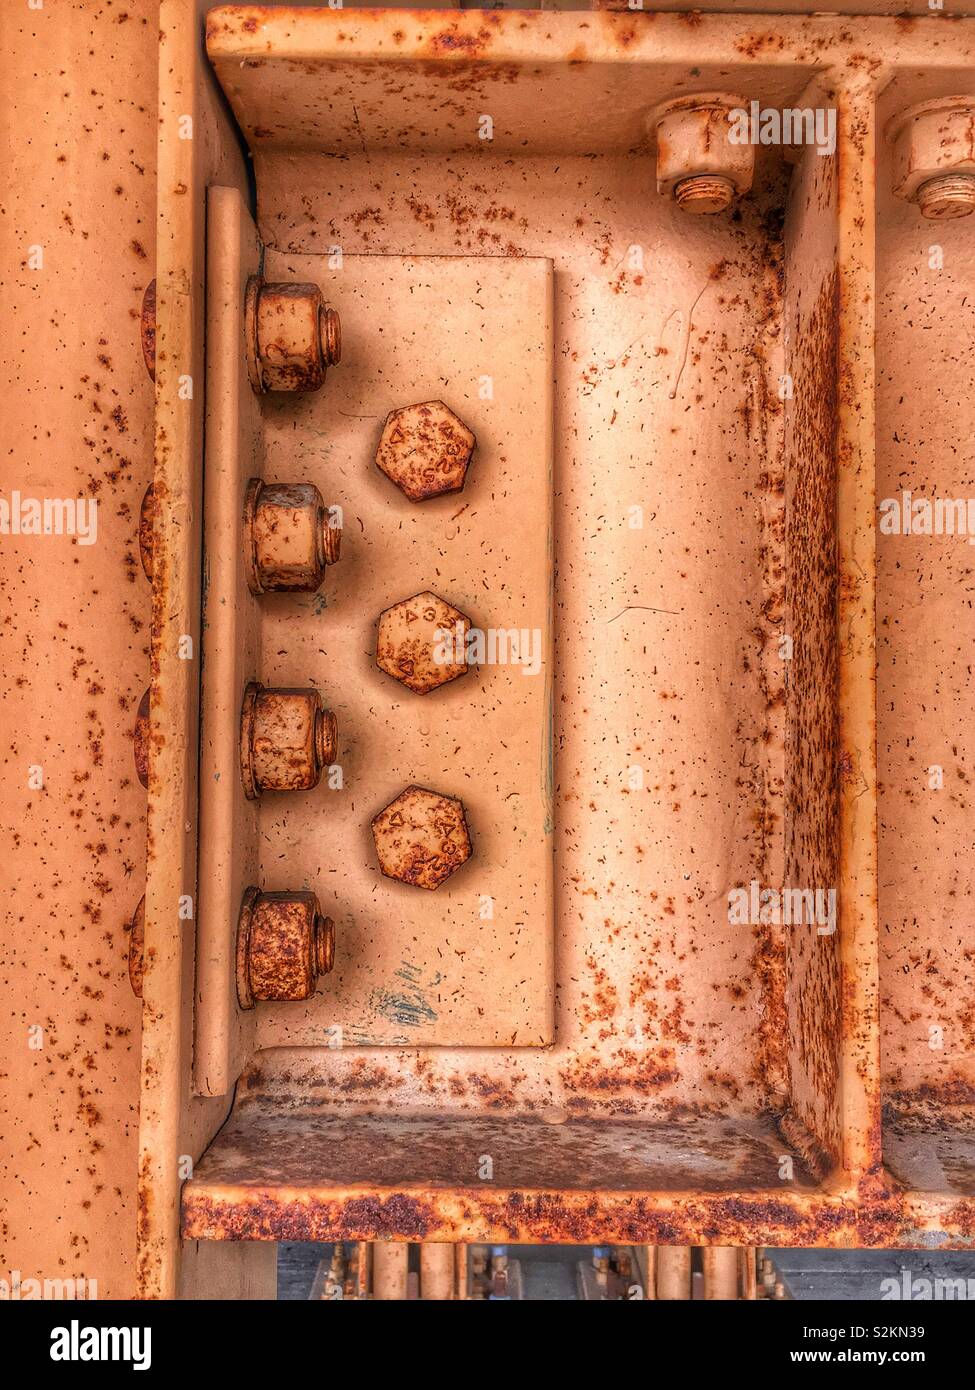 Authentic Vintage Bolted And Welded Steel Angle I Beam And Plate Connection Stock Photo Alamy